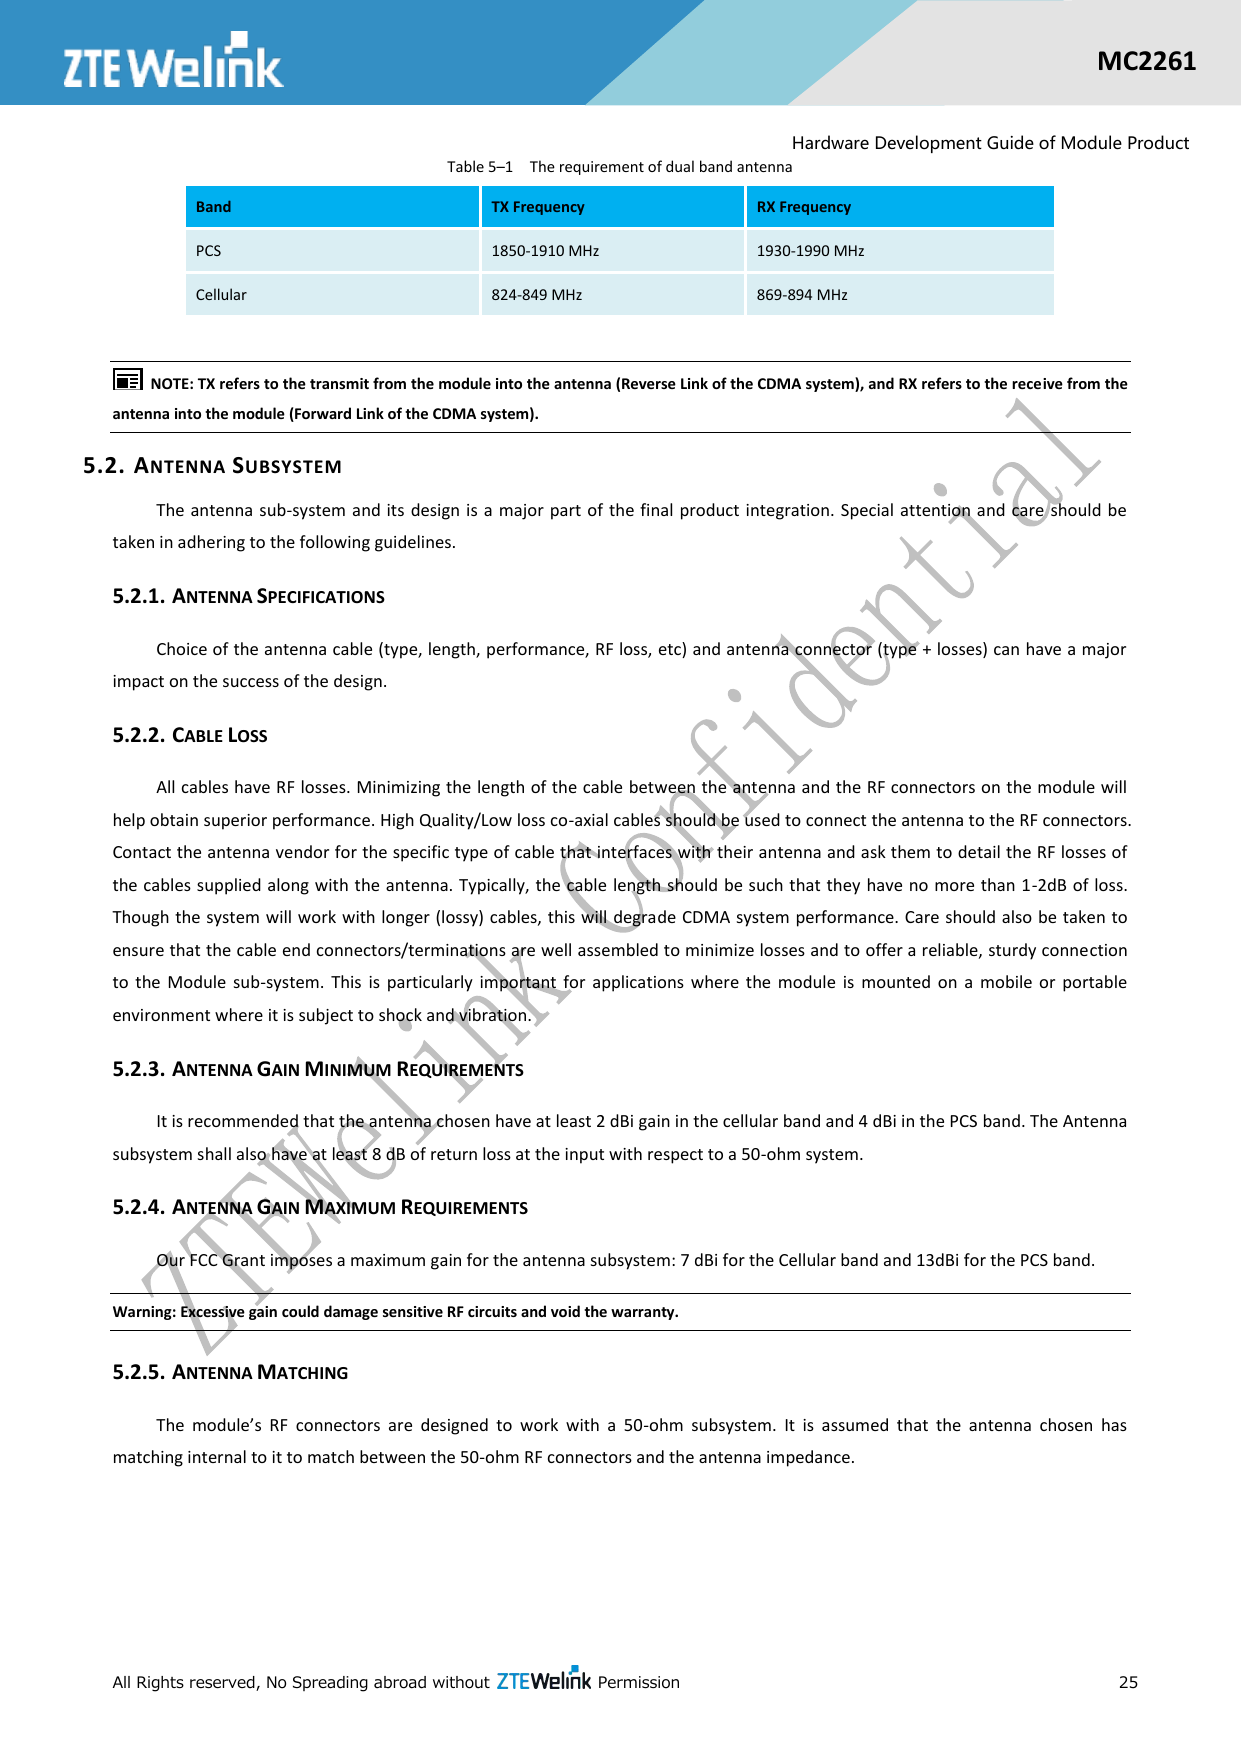  All Rights reserved, No Spreading abroad without    Permission      25  MC2261  Hardware Development Guide of Module Product Table 5–1  The requirement of dual band antenna        NOTE: TX refers to the transmit from the module into the antenna (Reverse Link of the CDMA system), and RX refers to the receive from the antenna into the module (Forward Link of the CDMA system). 5.2. ANTENNA SUBSYSTEM The antenna sub-system and its design is a major part of the  final  product integration. Special attention and care  should be taken in adhering to the following guidelines. 5.2.1. ANTENNA SPECIFICATIONS Choice of the antenna cable (type, length, performance, RF loss, etc) and antenna connector (type + losses) can have a major impact on the success of the design. 5.2.2. CABLE LOSS All cables have RF losses. Minimizing the length of the cable between the antenna and the RF connectors on the module will help obtain superior performance. High Quality/Low loss co-axial cables should be used to connect the antenna to the RF connectors. Contact the antenna vendor for the specific type of cable that interfaces with their antenna and ask them to detail the RF losses of the cables supplied along with the antenna. Typically, the cable length should be such that they have no more than 1-2dB of loss. Though the system will work with longer (lossy) cables, this will degrade CDMA system performance. Care should also be taken to ensure that the cable end connectors/terminations are well assembled to minimize losses and to offer a reliable, sturdy connection to  the  Module  sub-system.  This  is  particularly  important  for  applications  where  the  module  is  mounted  on  a  mobile  or  portable environment where it is subject to shock and vibration. 5.2.3. ANTENNA GAIN MINIMUM REQUIREMENTS It is recommended that the antenna chosen have at least 2 dBi gain in the cellular band and 4 dBi in the PCS band. The Antenna subsystem shall also have at least 8 dB of return loss at the input with respect to a 50-ohm system. 5.2.4. ANTENNA GAIN MAXIMUM REQUIREMENTS Our FCC Grant imposes a maximum gain for the antenna subsystem: 7 dBi for the Cellular band and 13dBi for the PCS band. Warning: Excessive gain could damage sensitive RF circuits and void the warranty. 5.2.5. ANTENNA MATCHING The  module’s  RF  connectors  are  designed  to  work  with  a  50-ohm  subsystem.  It  is  assumed  that  the  antenna  chosen  has matching internal to it to match between the 50-ohm RF connectors and the antenna impedance. Band TX Frequency RX Frequency PCS 1850-1910 MHz 1930-1990 MHz Cellular 824-849 MHz 869-894 MHz 